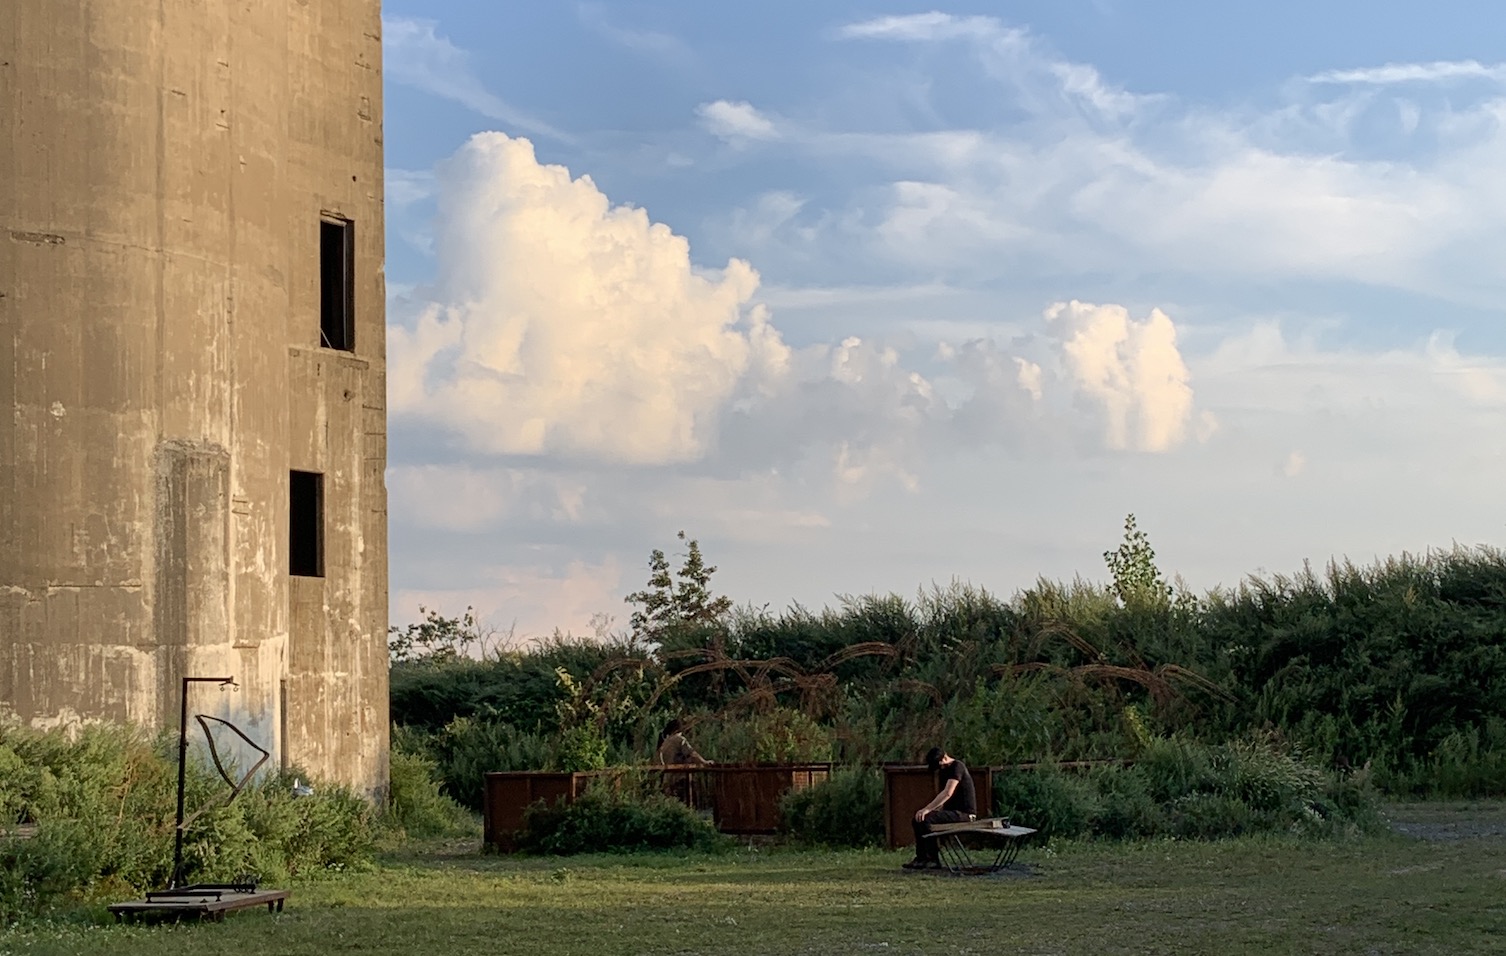 Documentation from Floaters, a performance by Workspace Resident Rob Cosgrove at Silo City, September 4, 2022. A photograph at dusk; there are enormous grain silos on the left of the image and that do not fit in the frame. In the center of the image is a person with a handmade instrument that is part of the performance.